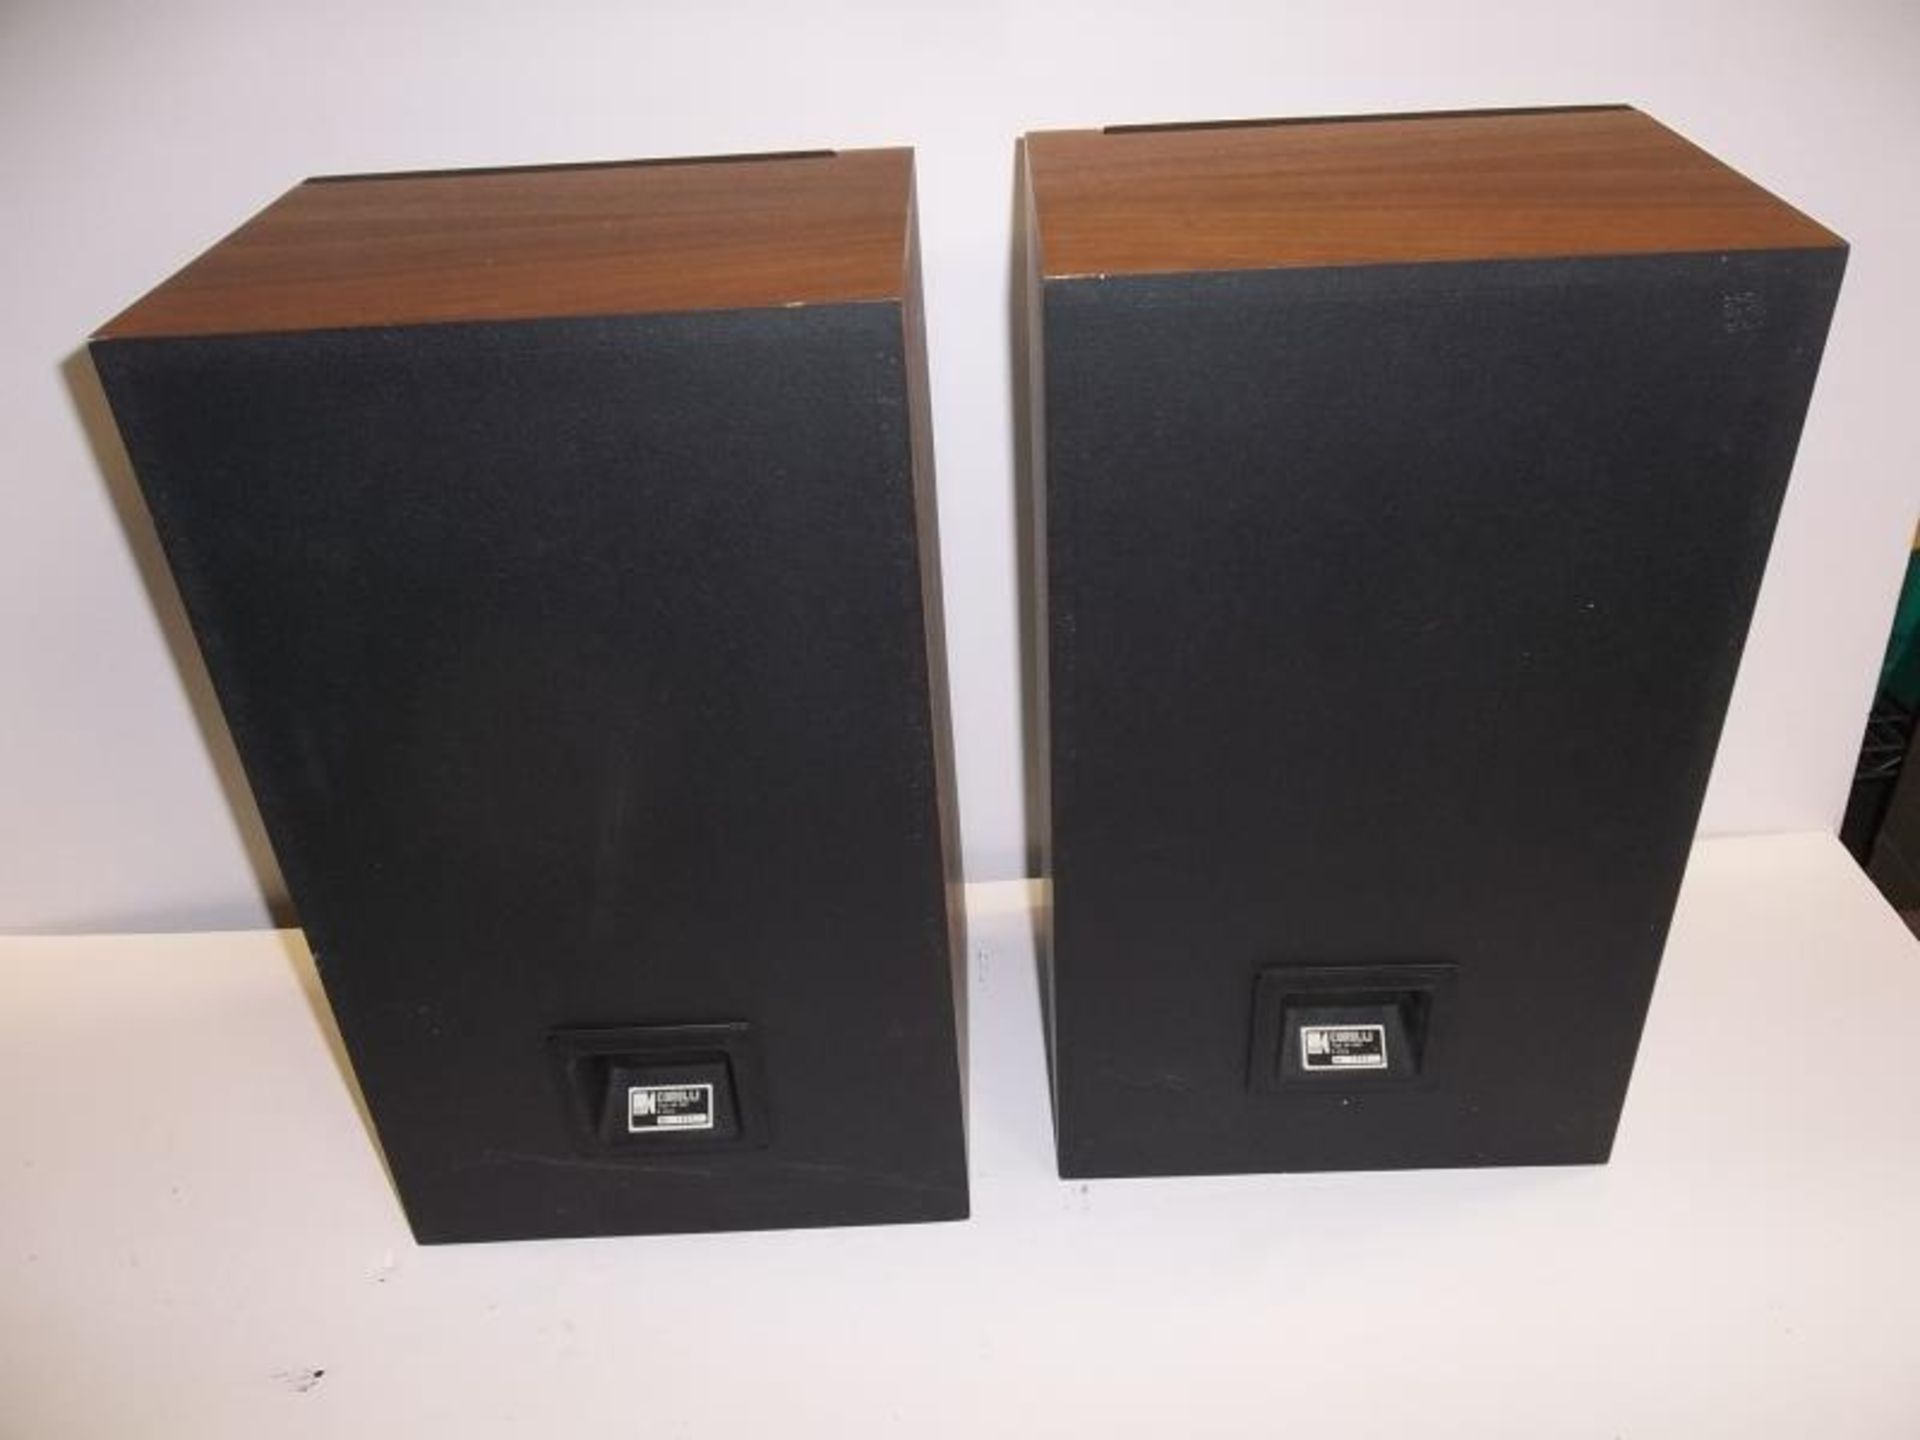 2 KEF Speakers, model 1681, 1682, scatttered scratches - Image 3 of 3